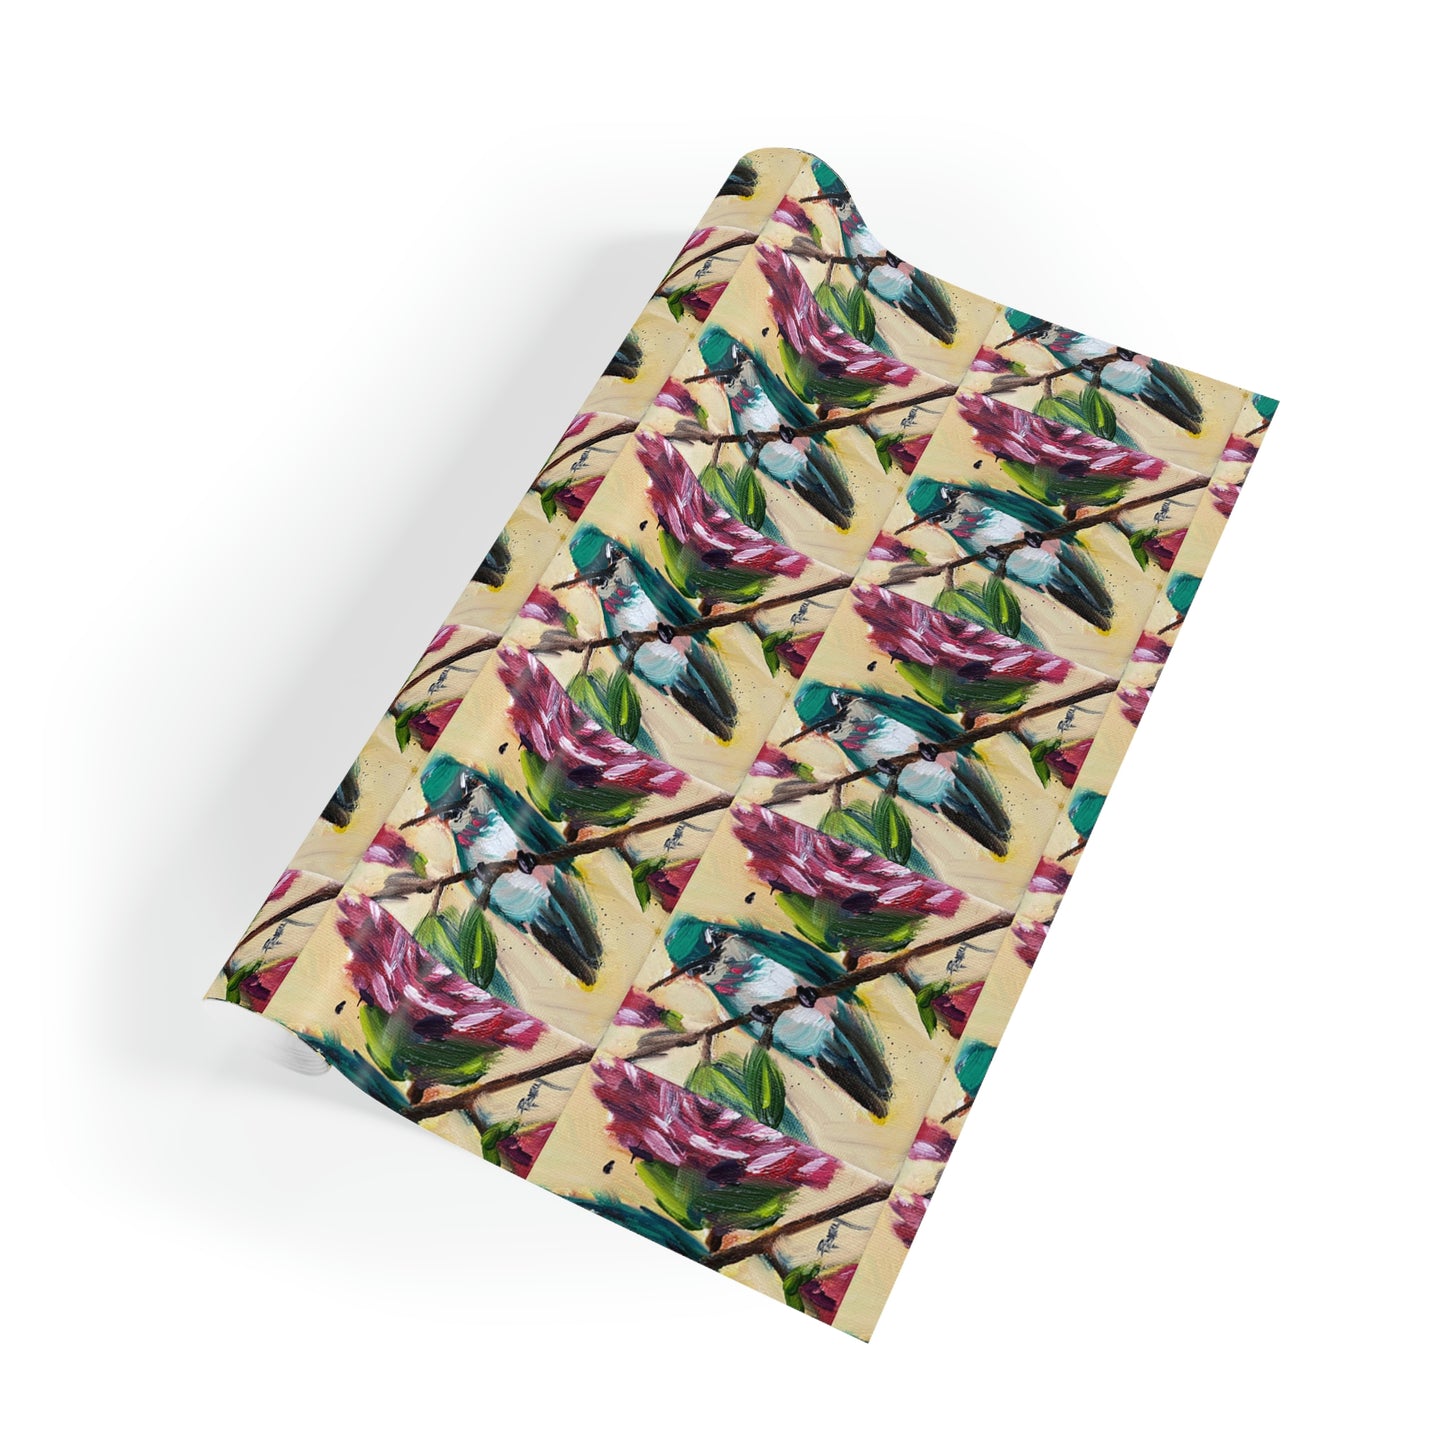 Hummingbird on a Rose Bush printed Gift Wrapping Paper Rolls, 1pc